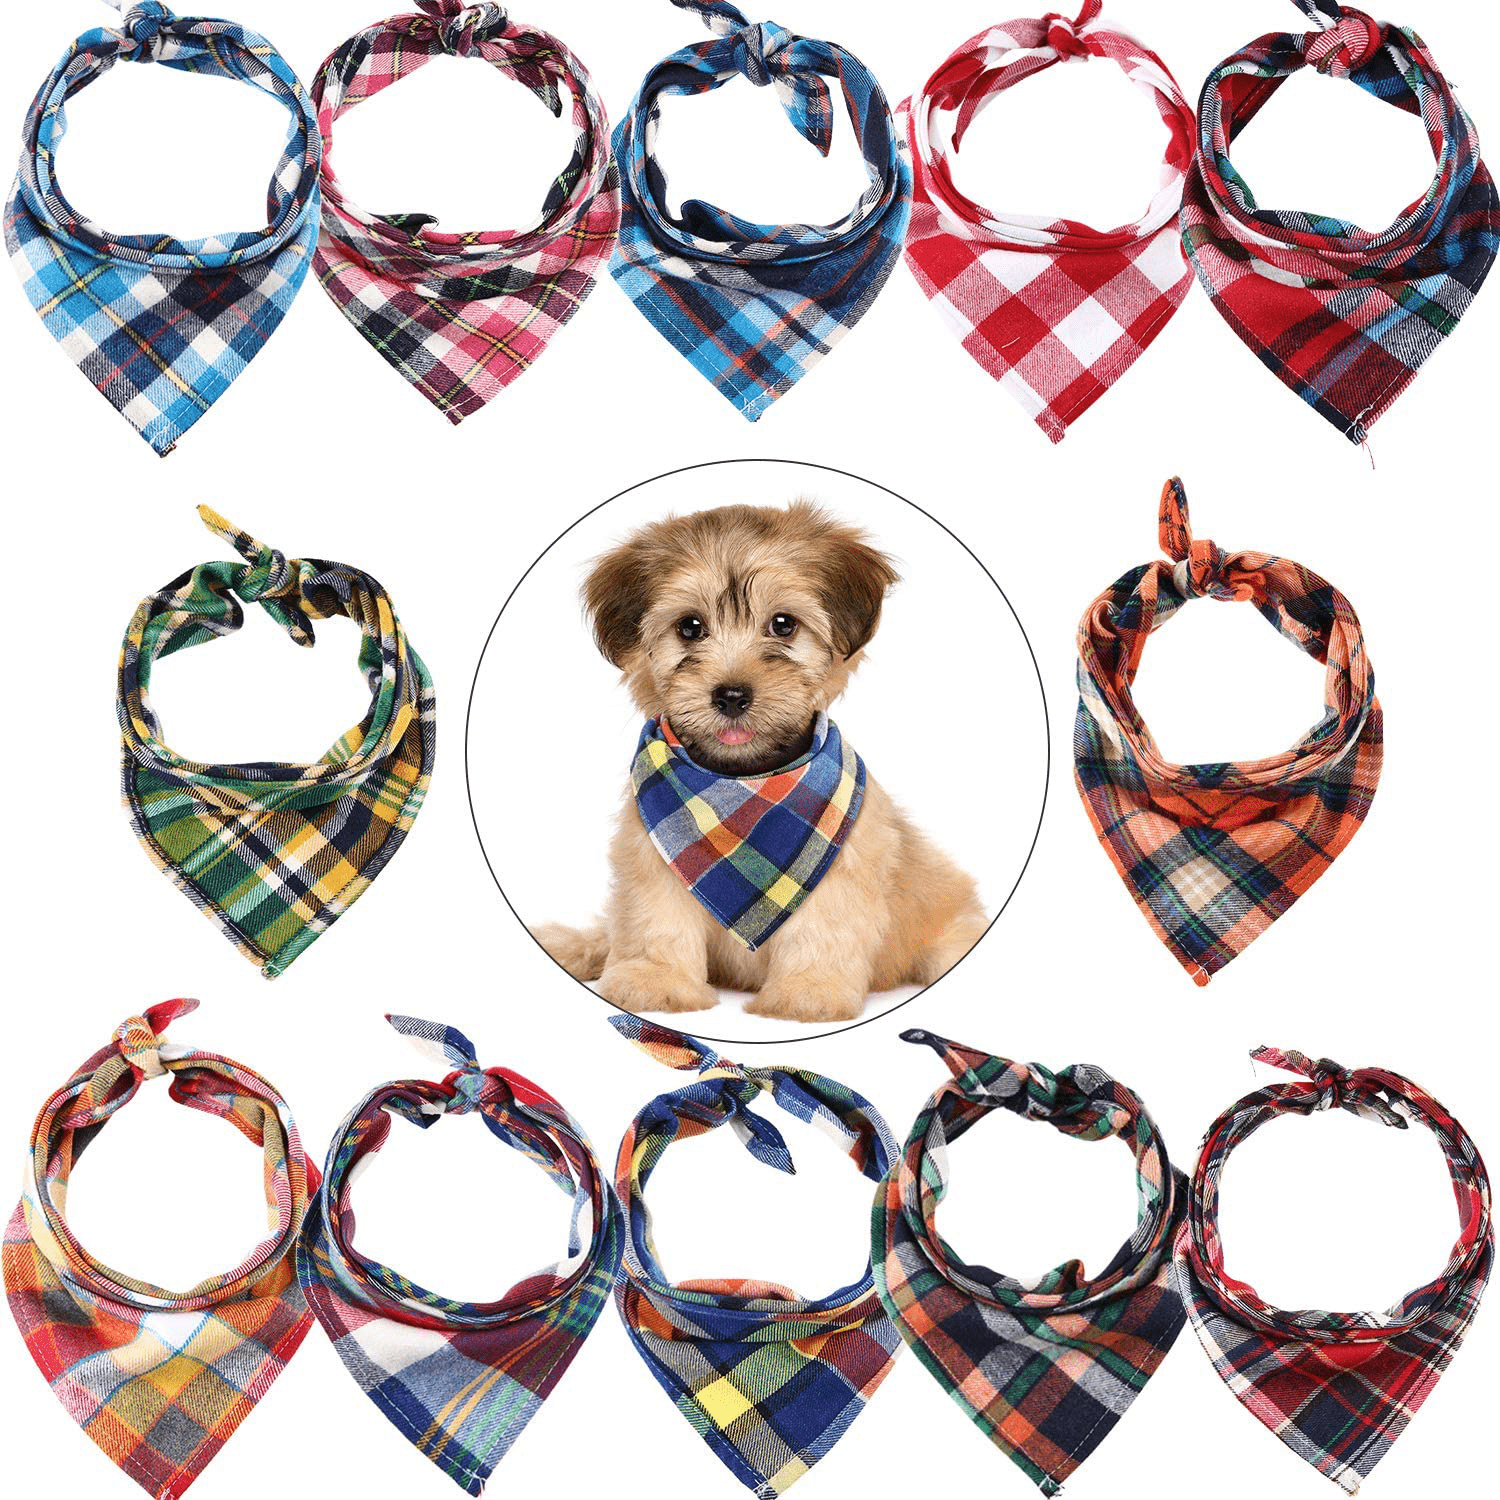 12 Pieces Dog Bandanas - Triangle Dog Scarf, Washable Reversible Printing, Bibs Dog Kerchief Set, Suitable for Small or Medium-Sized Cat and Dog Pets